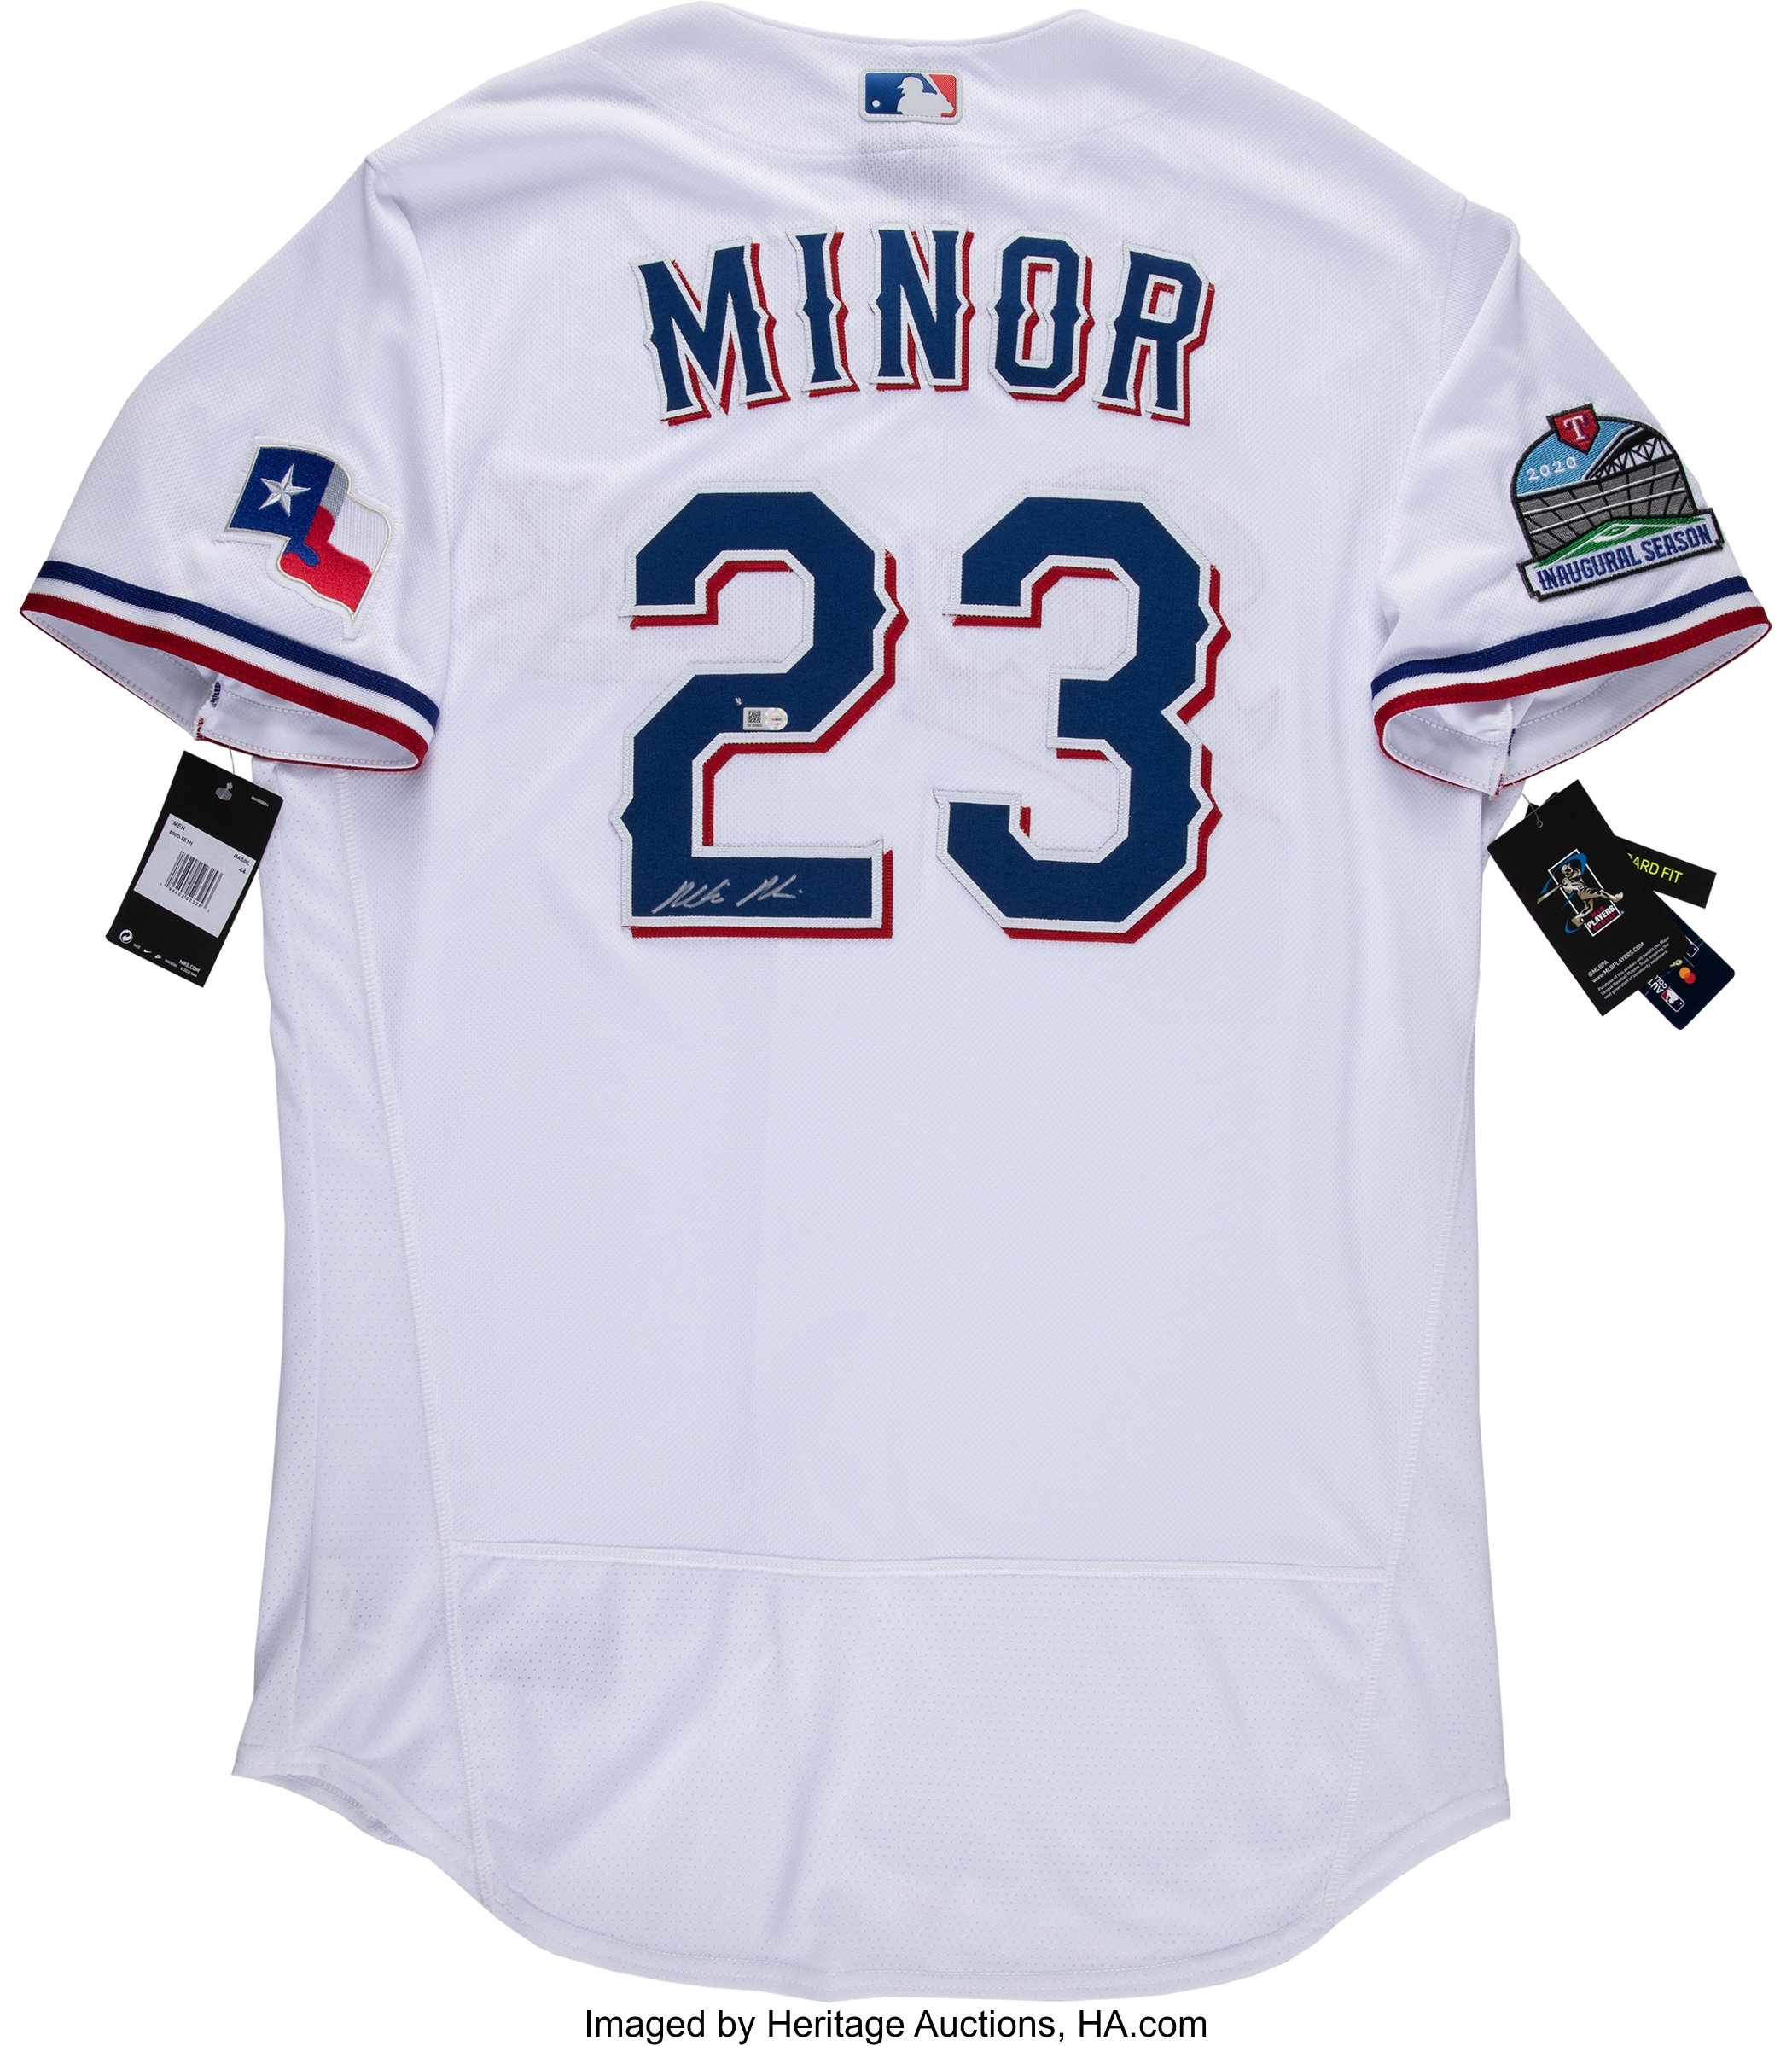 Mike Minor Signed Texas Rangers Jersey. Baseball Collectibles, Lot #22